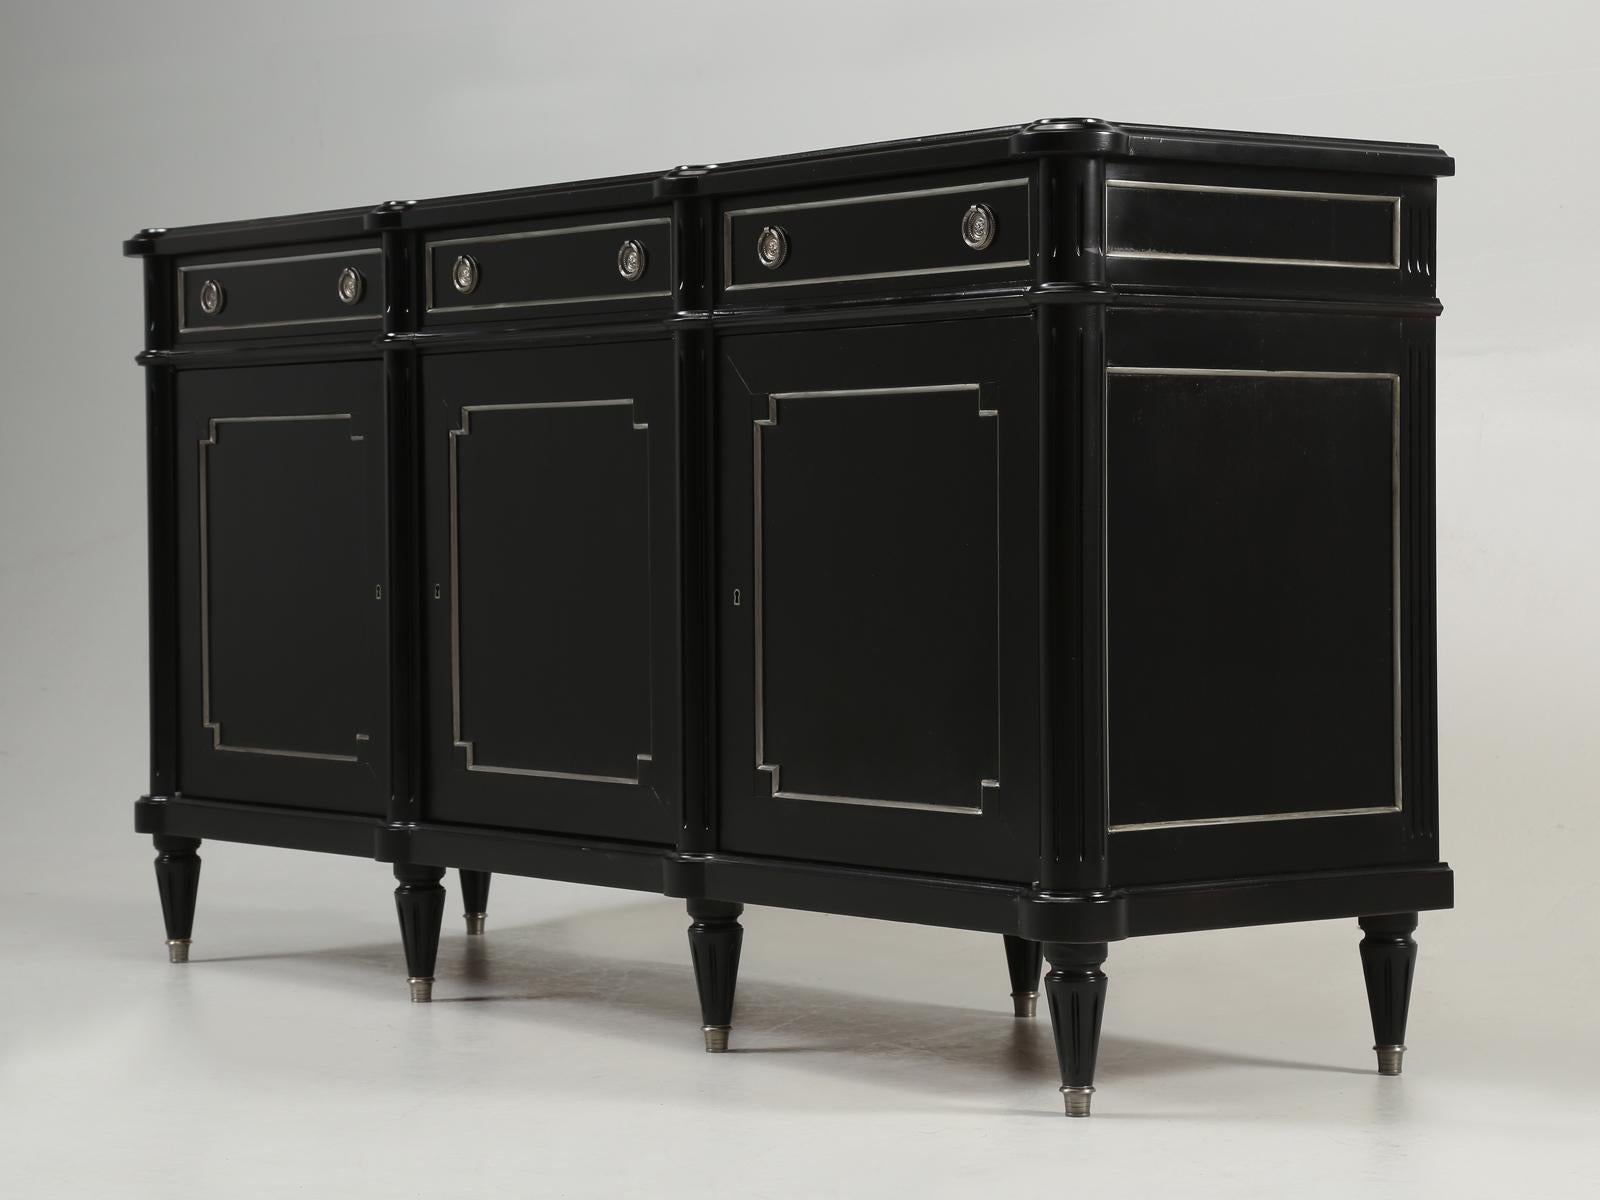 French ebonized mahogany Louis XVI style Buffet, imported from France and restored in the style of Maison Jansen. We have been importing French antiques from for over 30-years and I believe this is the first Louis XVI style buffet, that we have ever